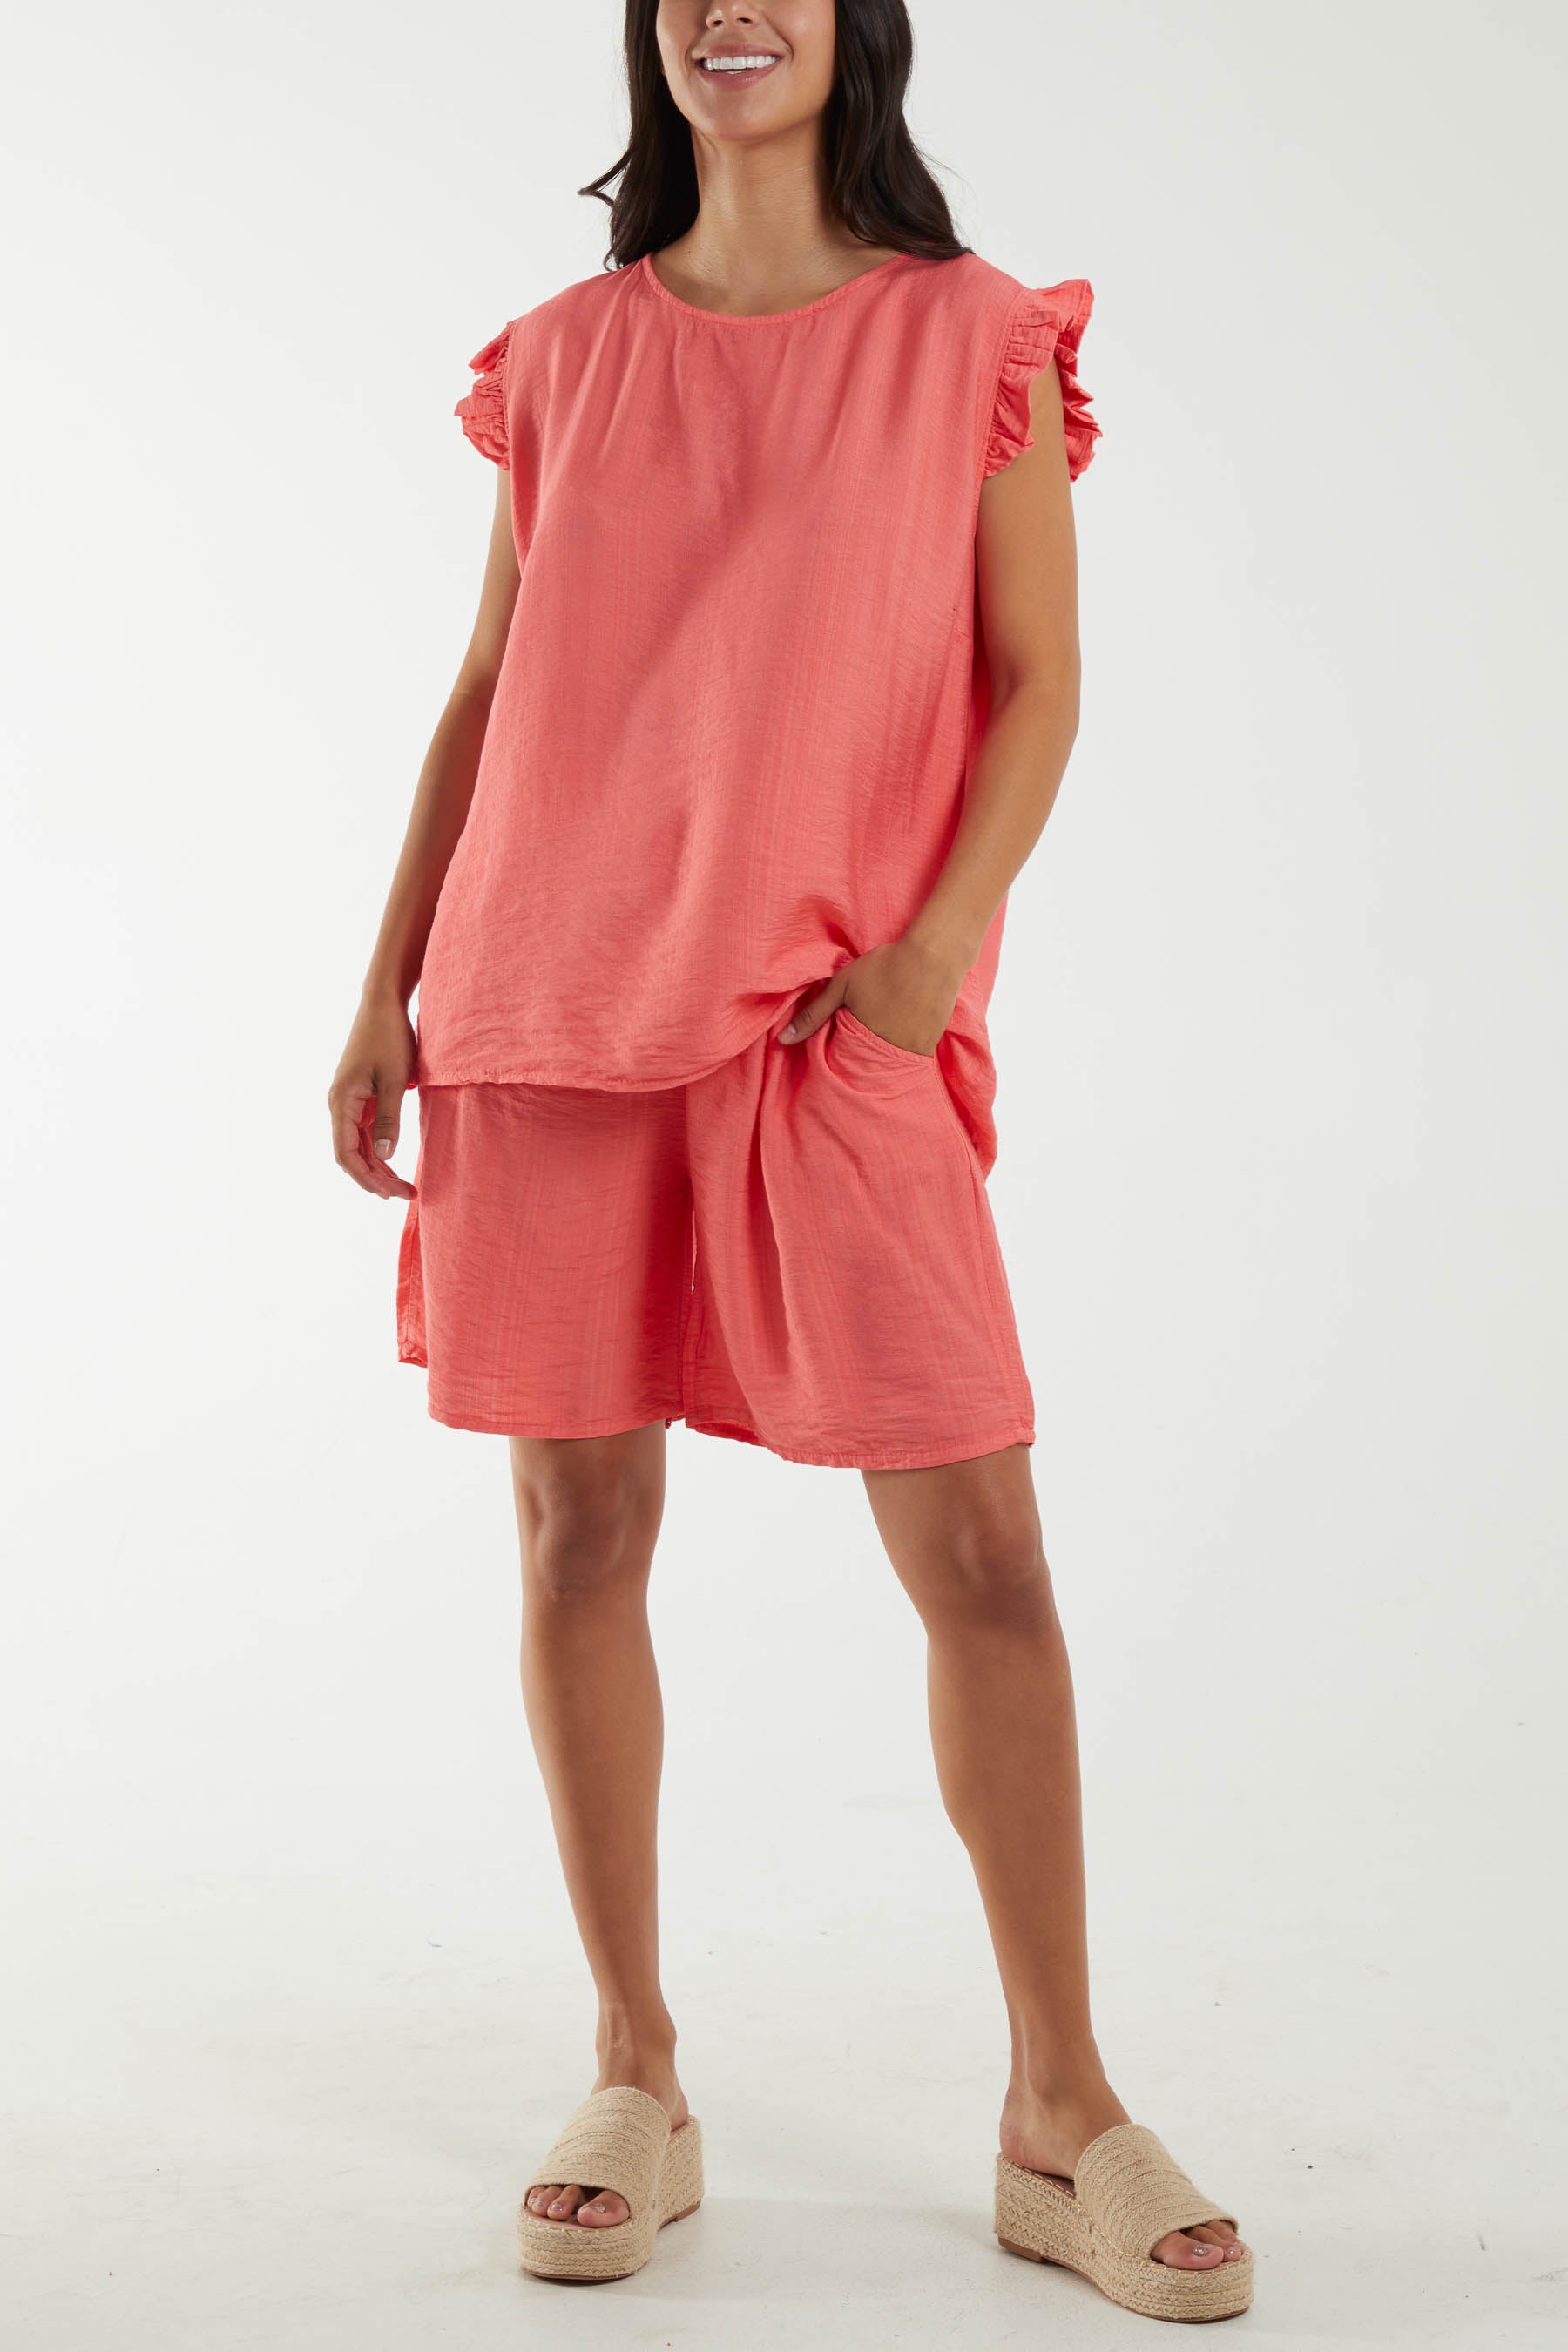 Co-Ord Frill Sleeve Top & Shorts